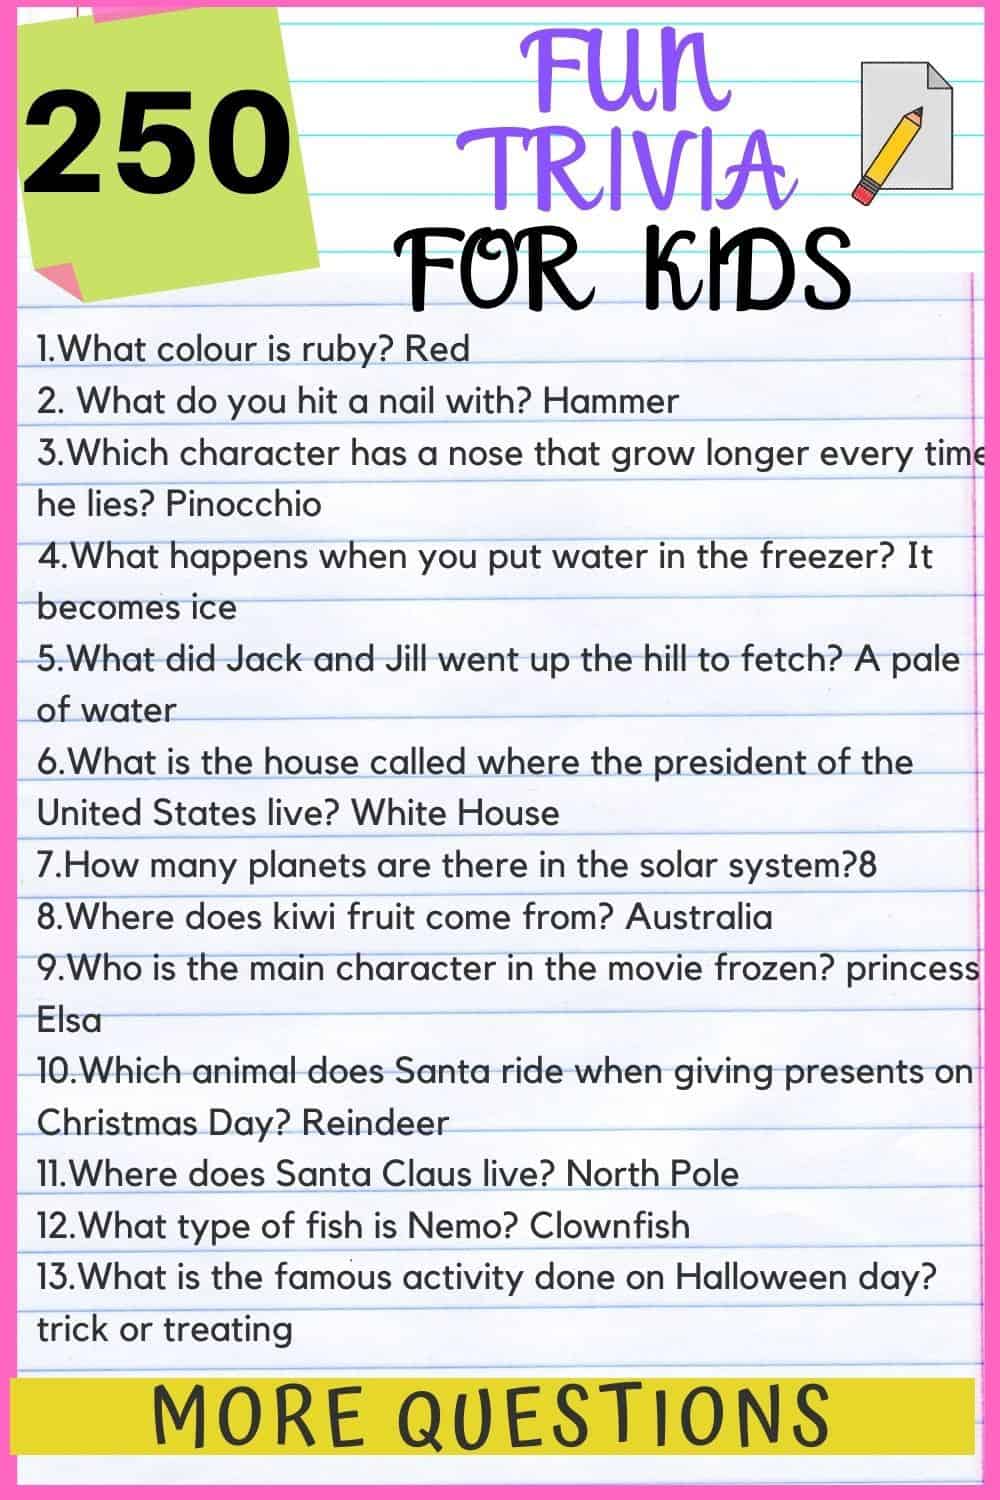 94-history-trivia-questions-with-answers-for-kids-adults-kids-n-clicks